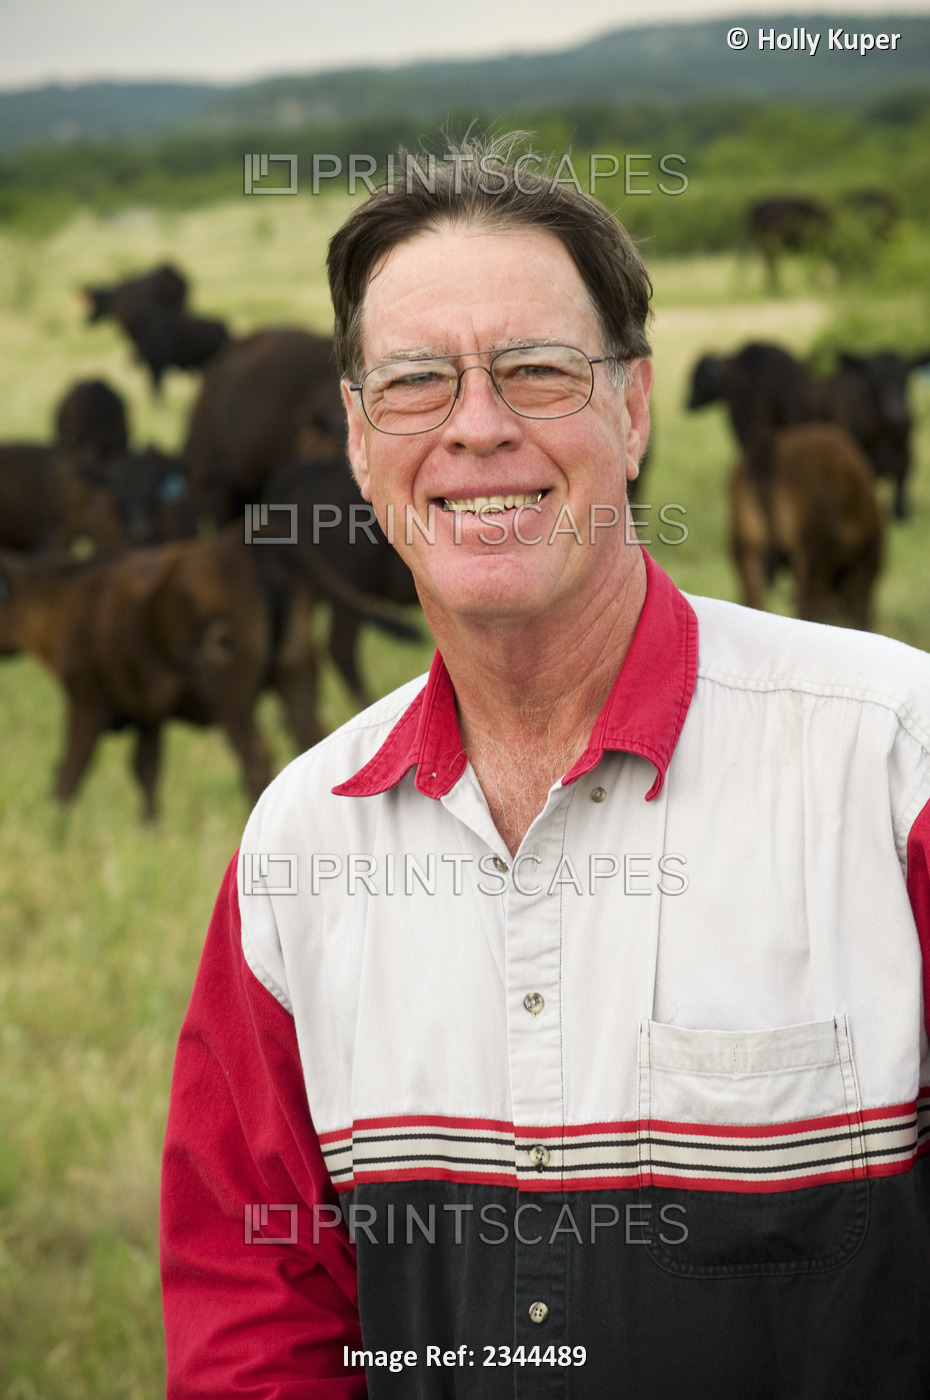 Livestock - Mike Campsey, a beef producer and rancher poses on a pasture with ...